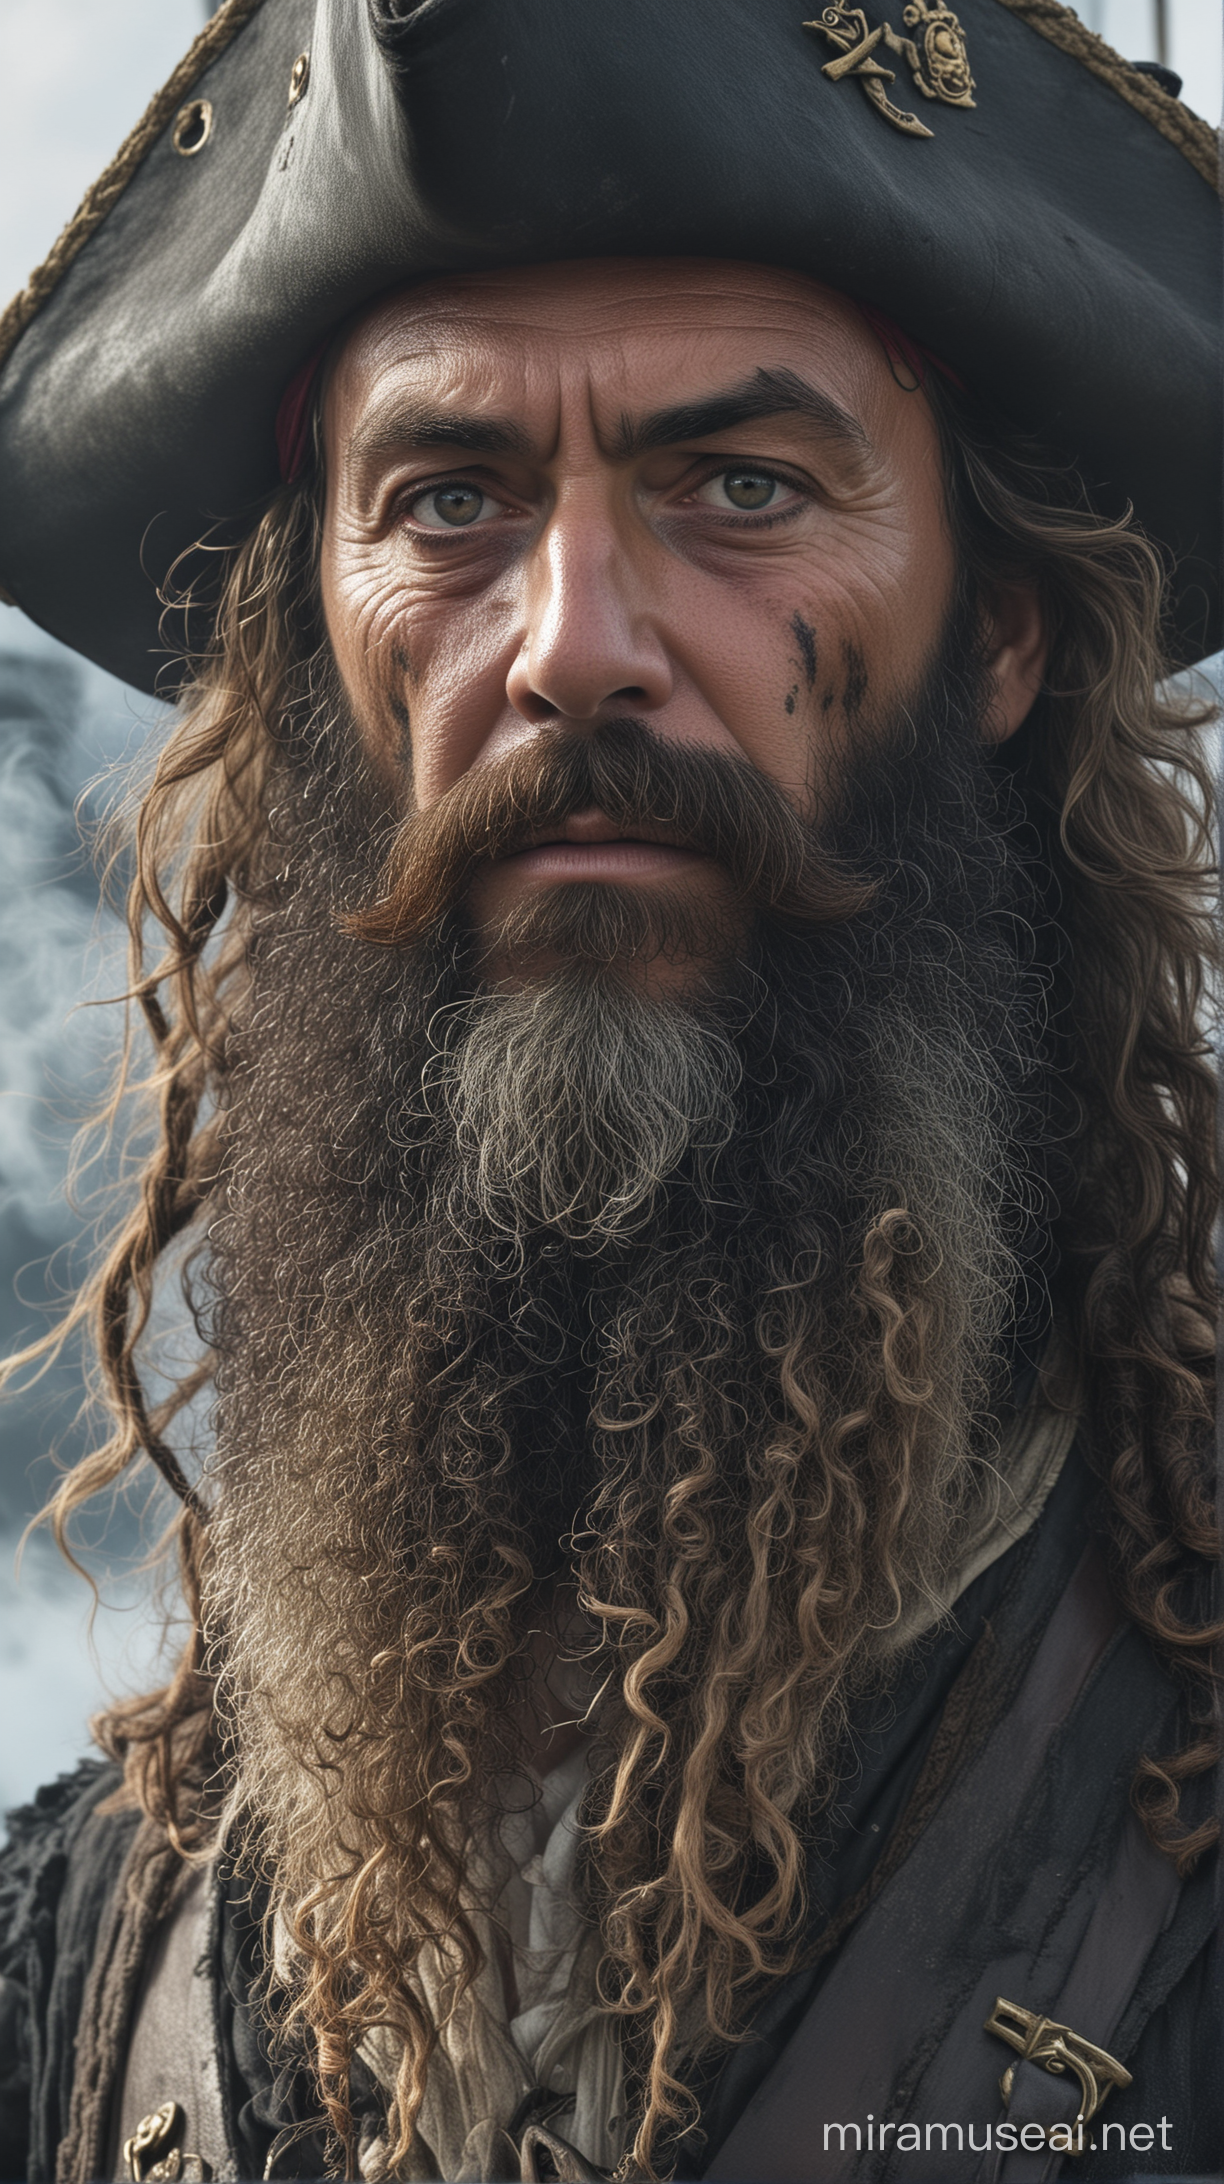 As Blackbeard stands on the deck of the Queen Anne's Revenge, smoke rises from his long, curly beard, enveloping him in a cloud of mist. The harsh lines of his face combine with the determined and menacing expression typical of an experienced pirate. His stern eyes gaze into the distance, as if scanning for enemies.

